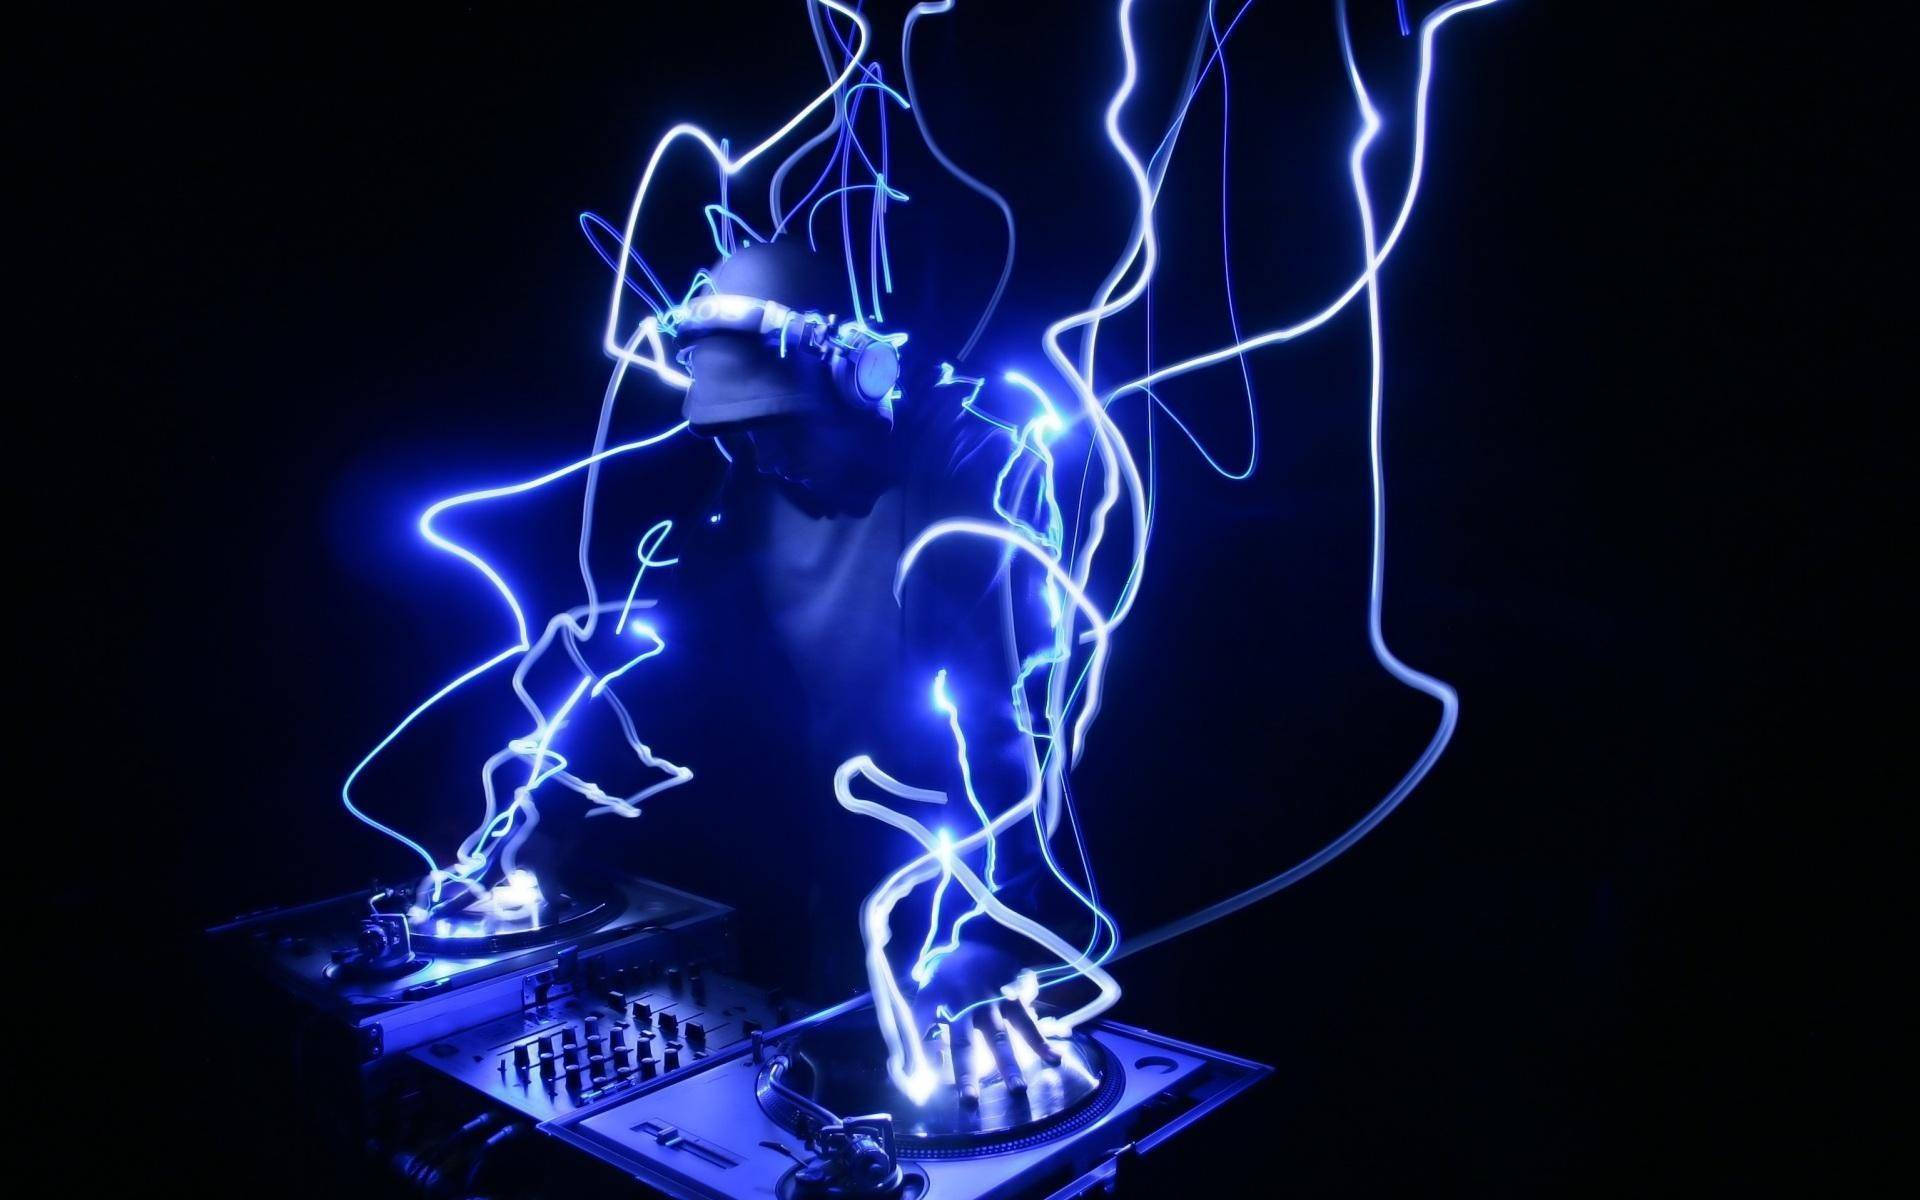 Electricity Effect On Dj Picture